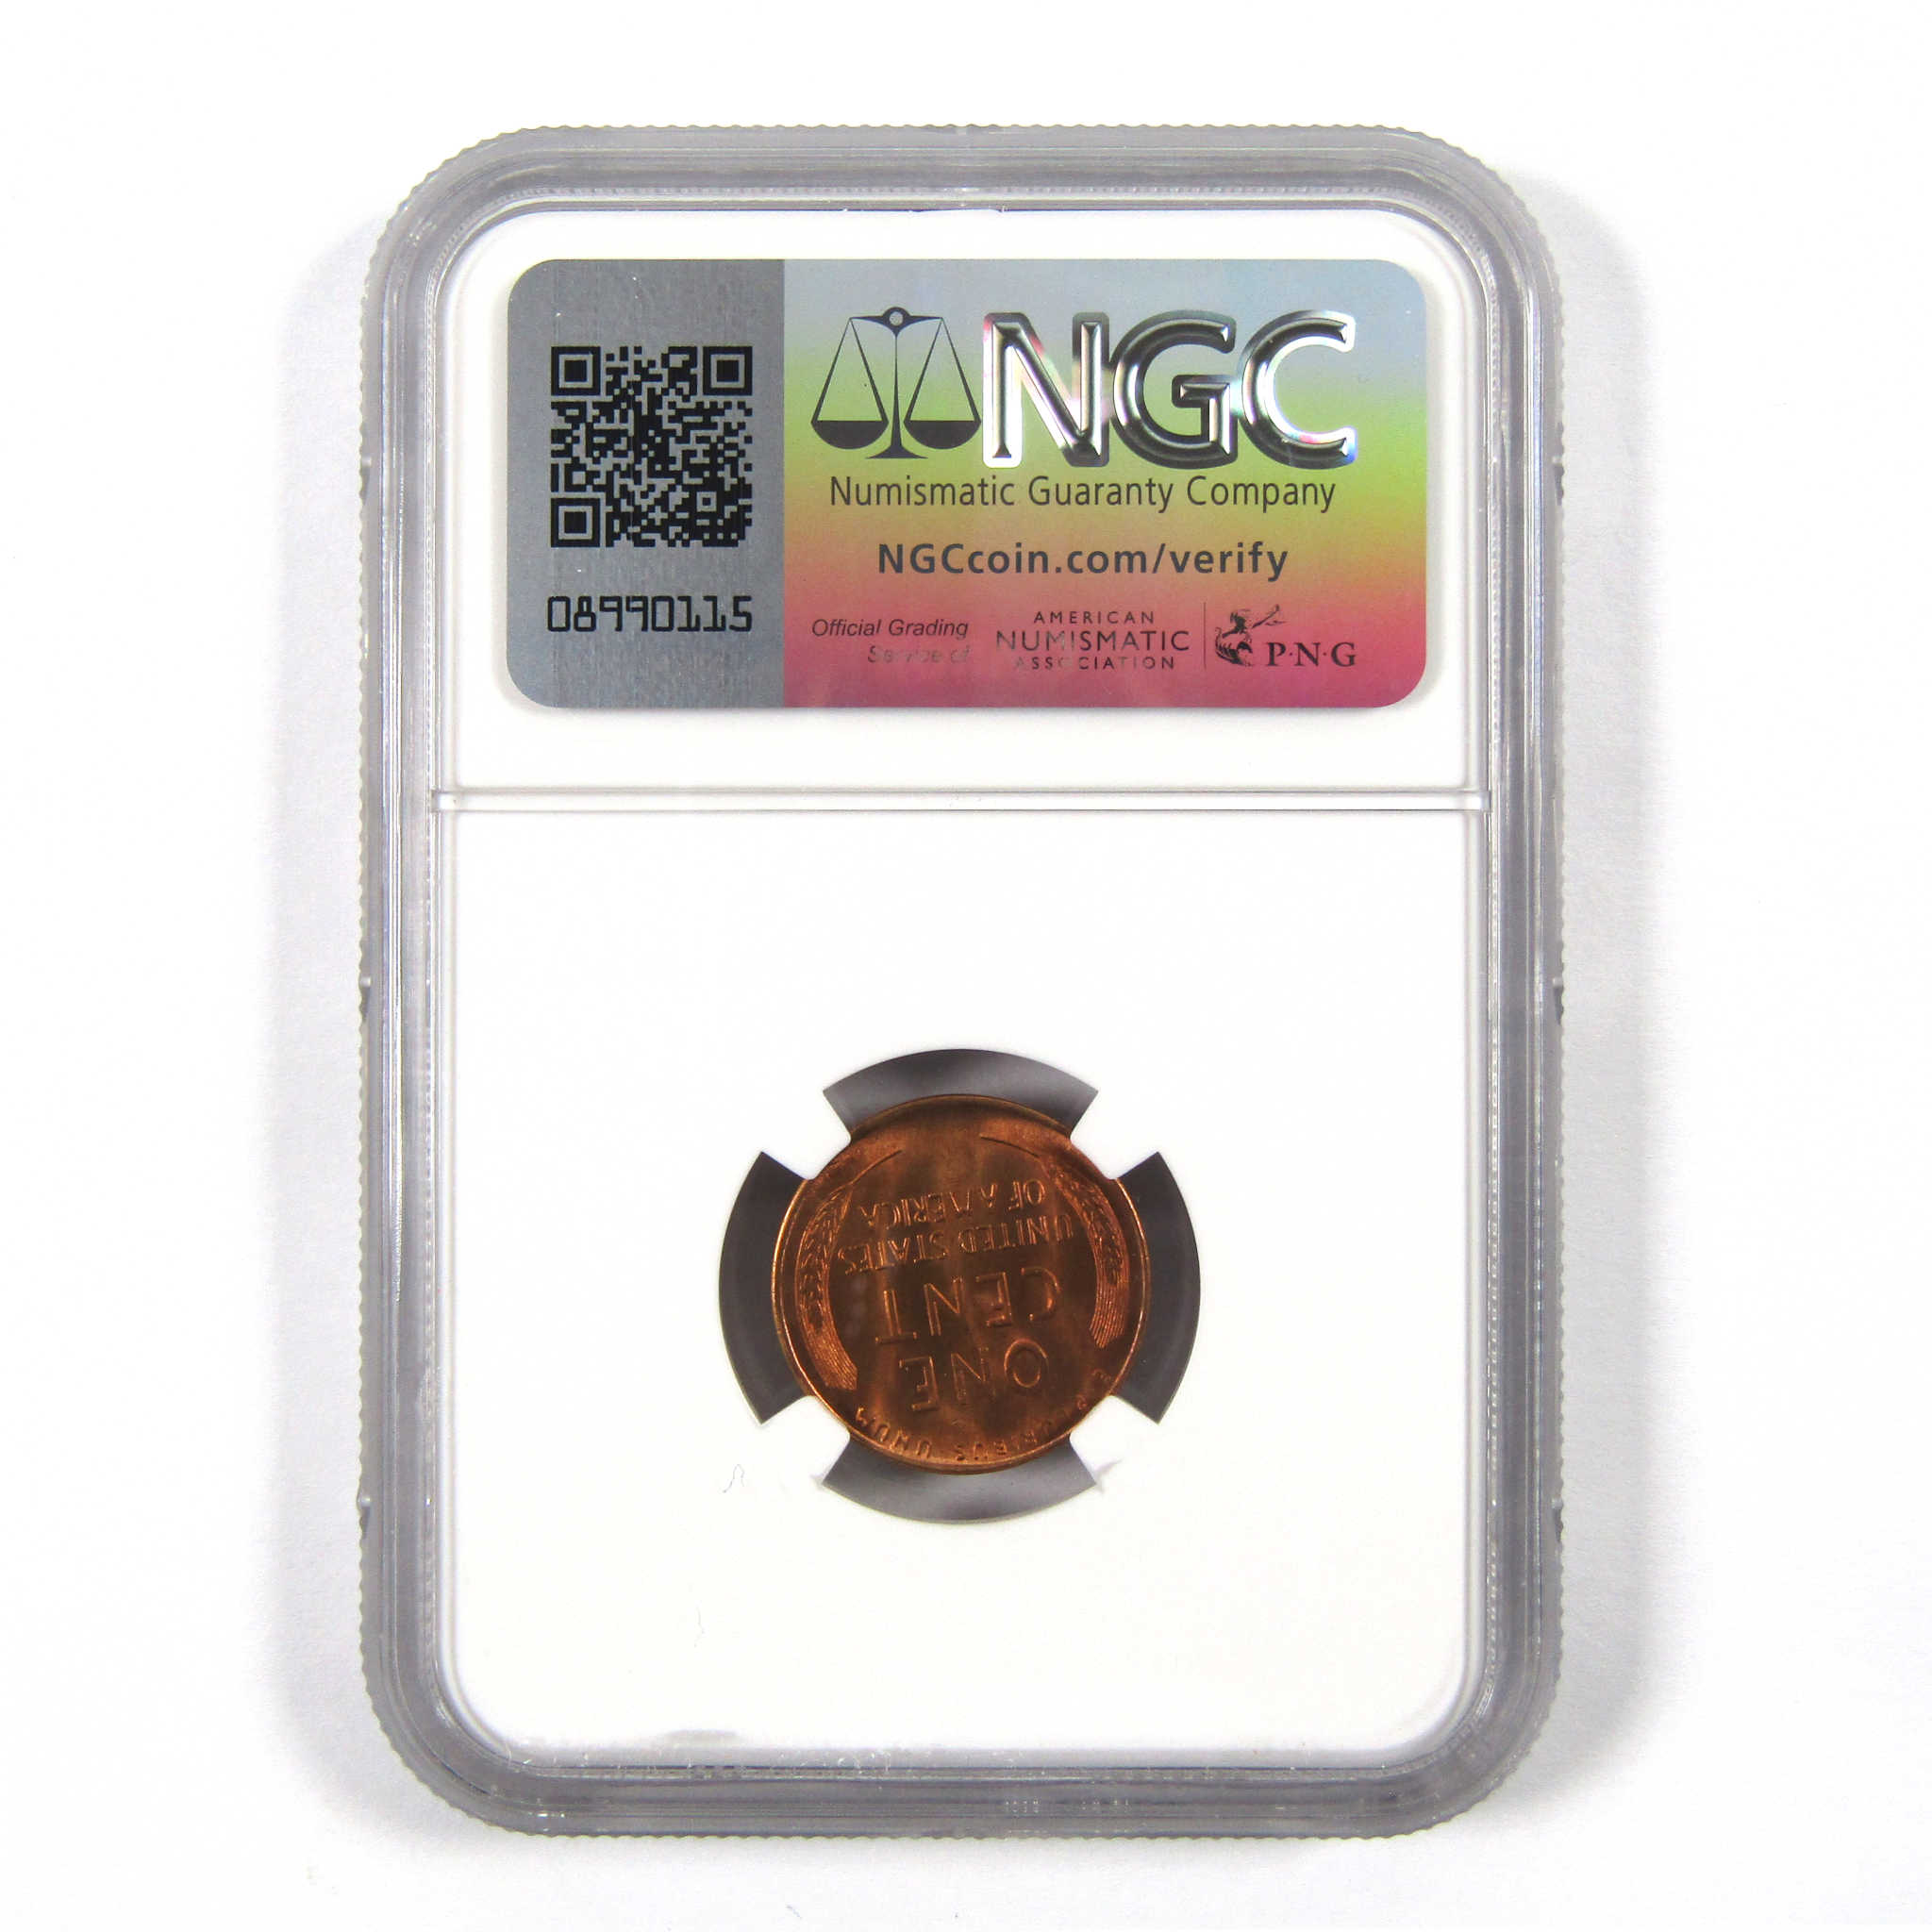 1947 S Lincoln Wheat Cent MS 67 RD NGC Penny 1c Uncirculated SKU:I9698